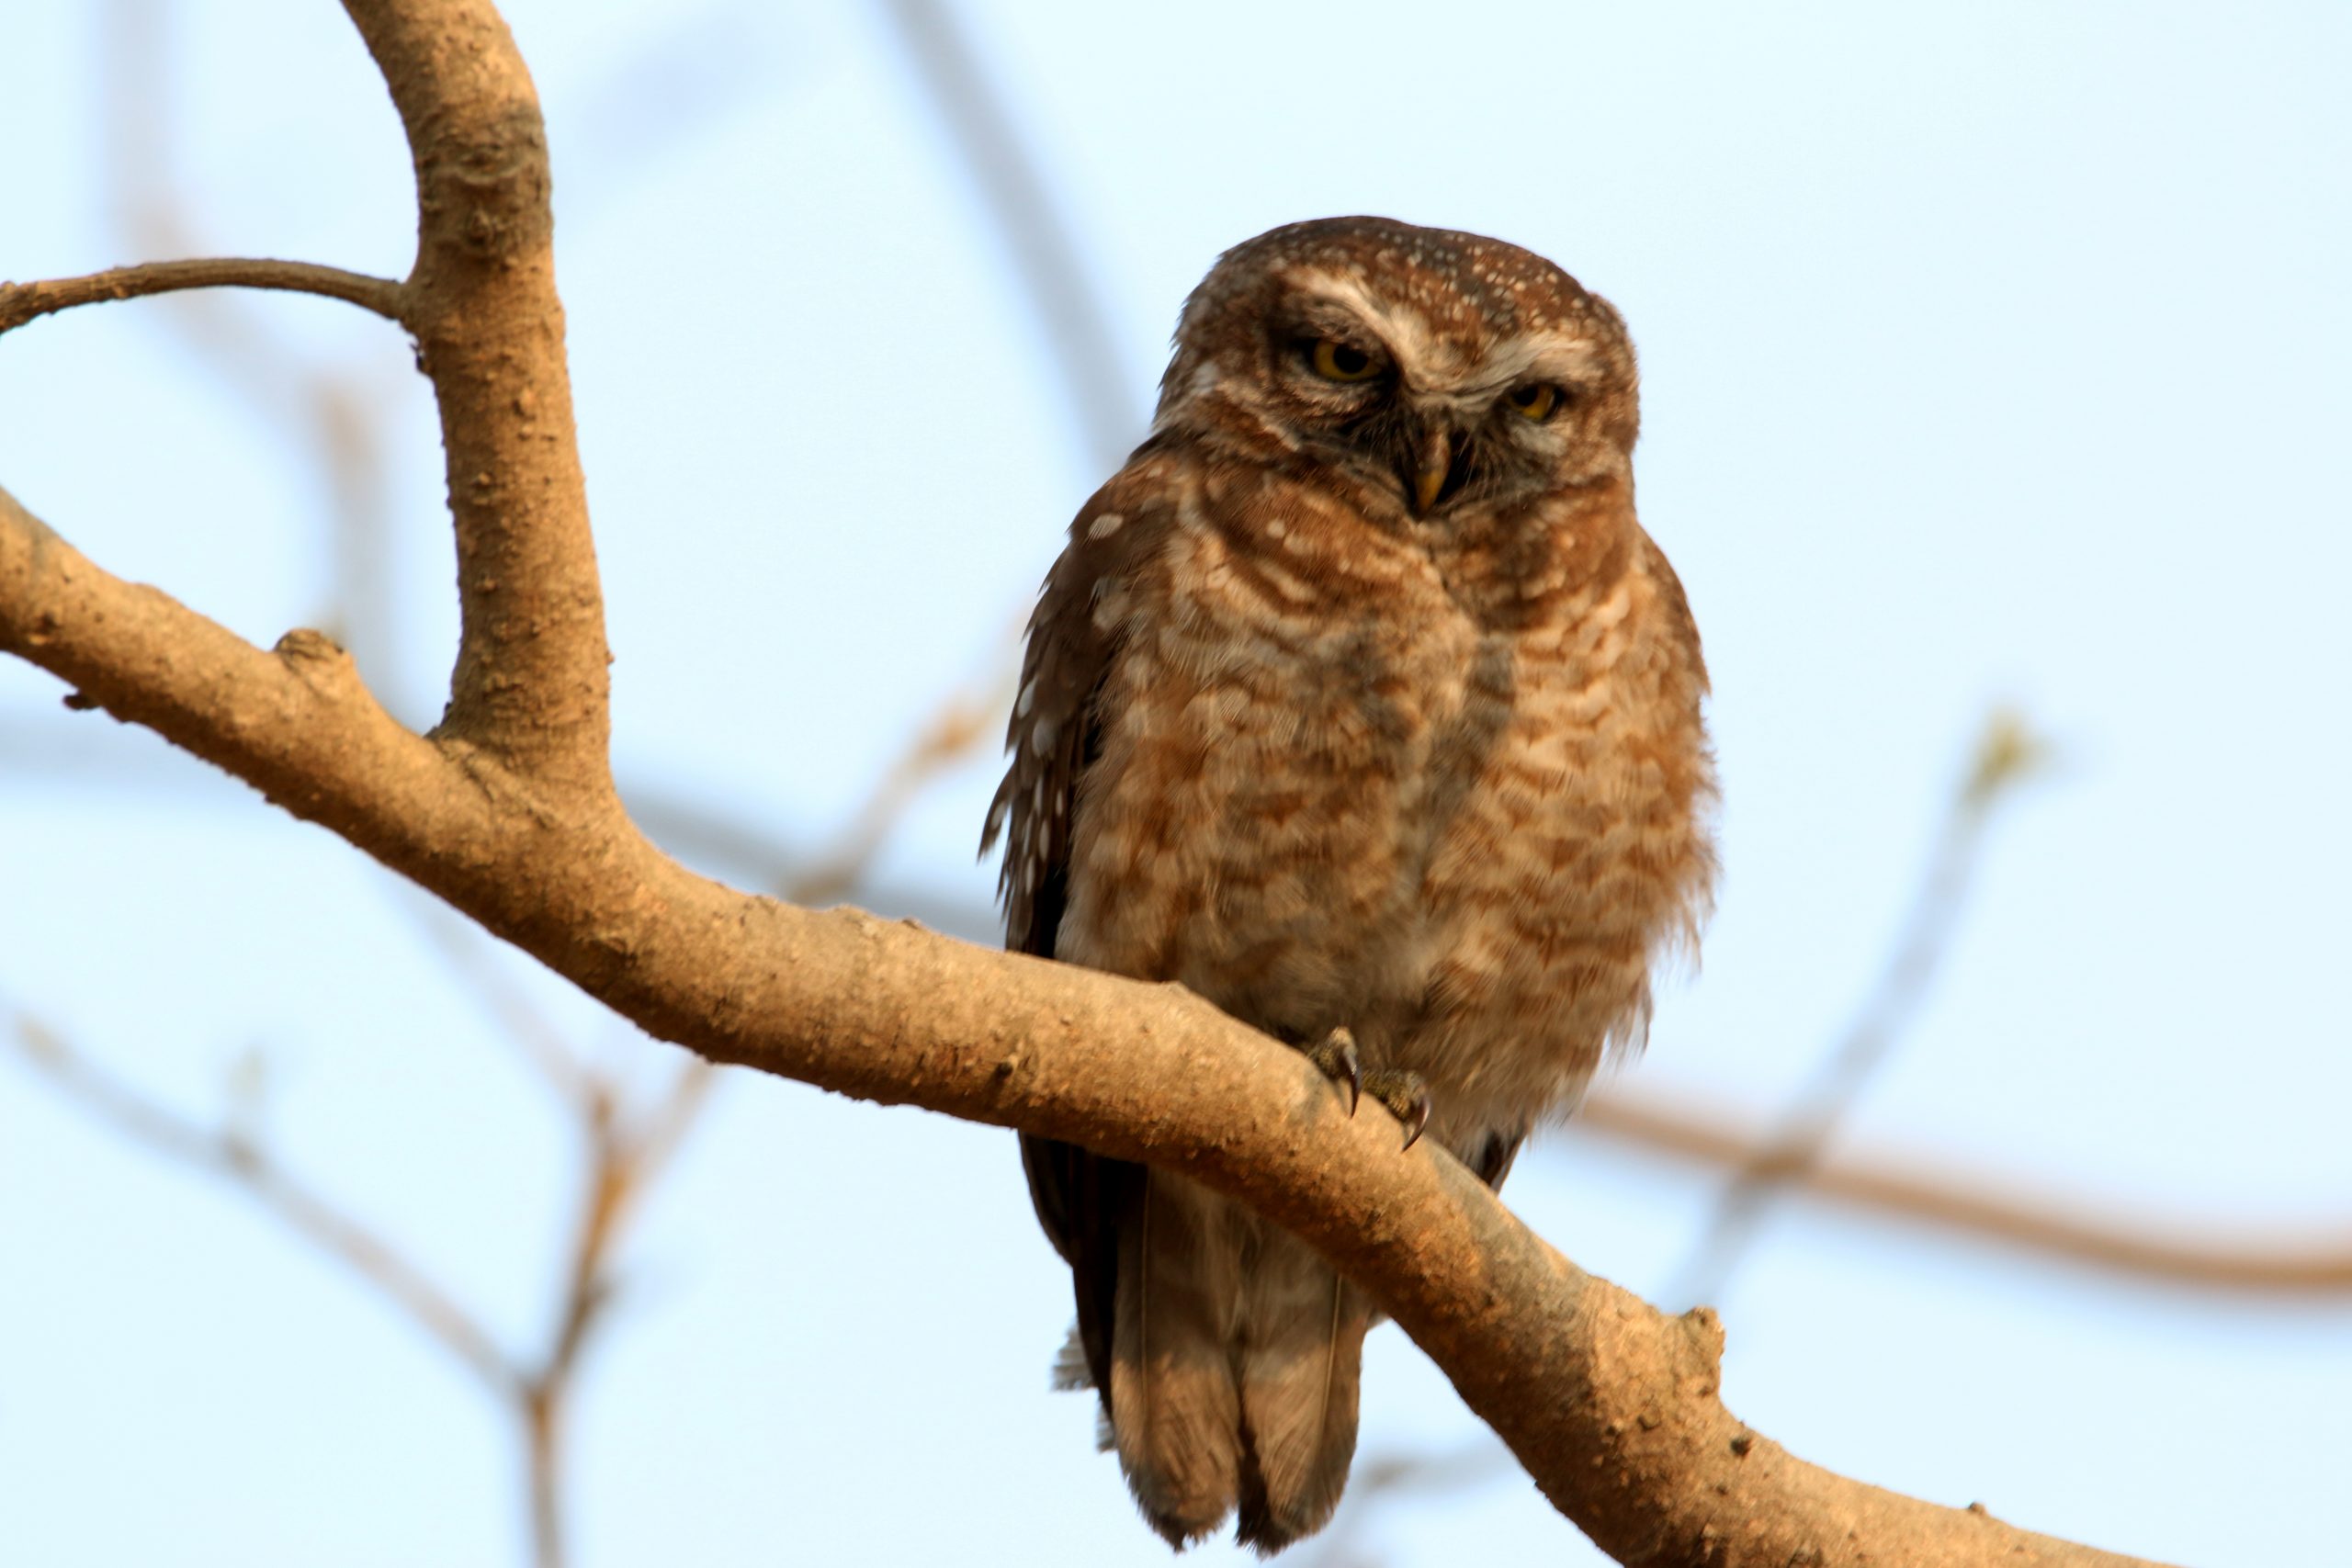 Owlet sitting on a branch